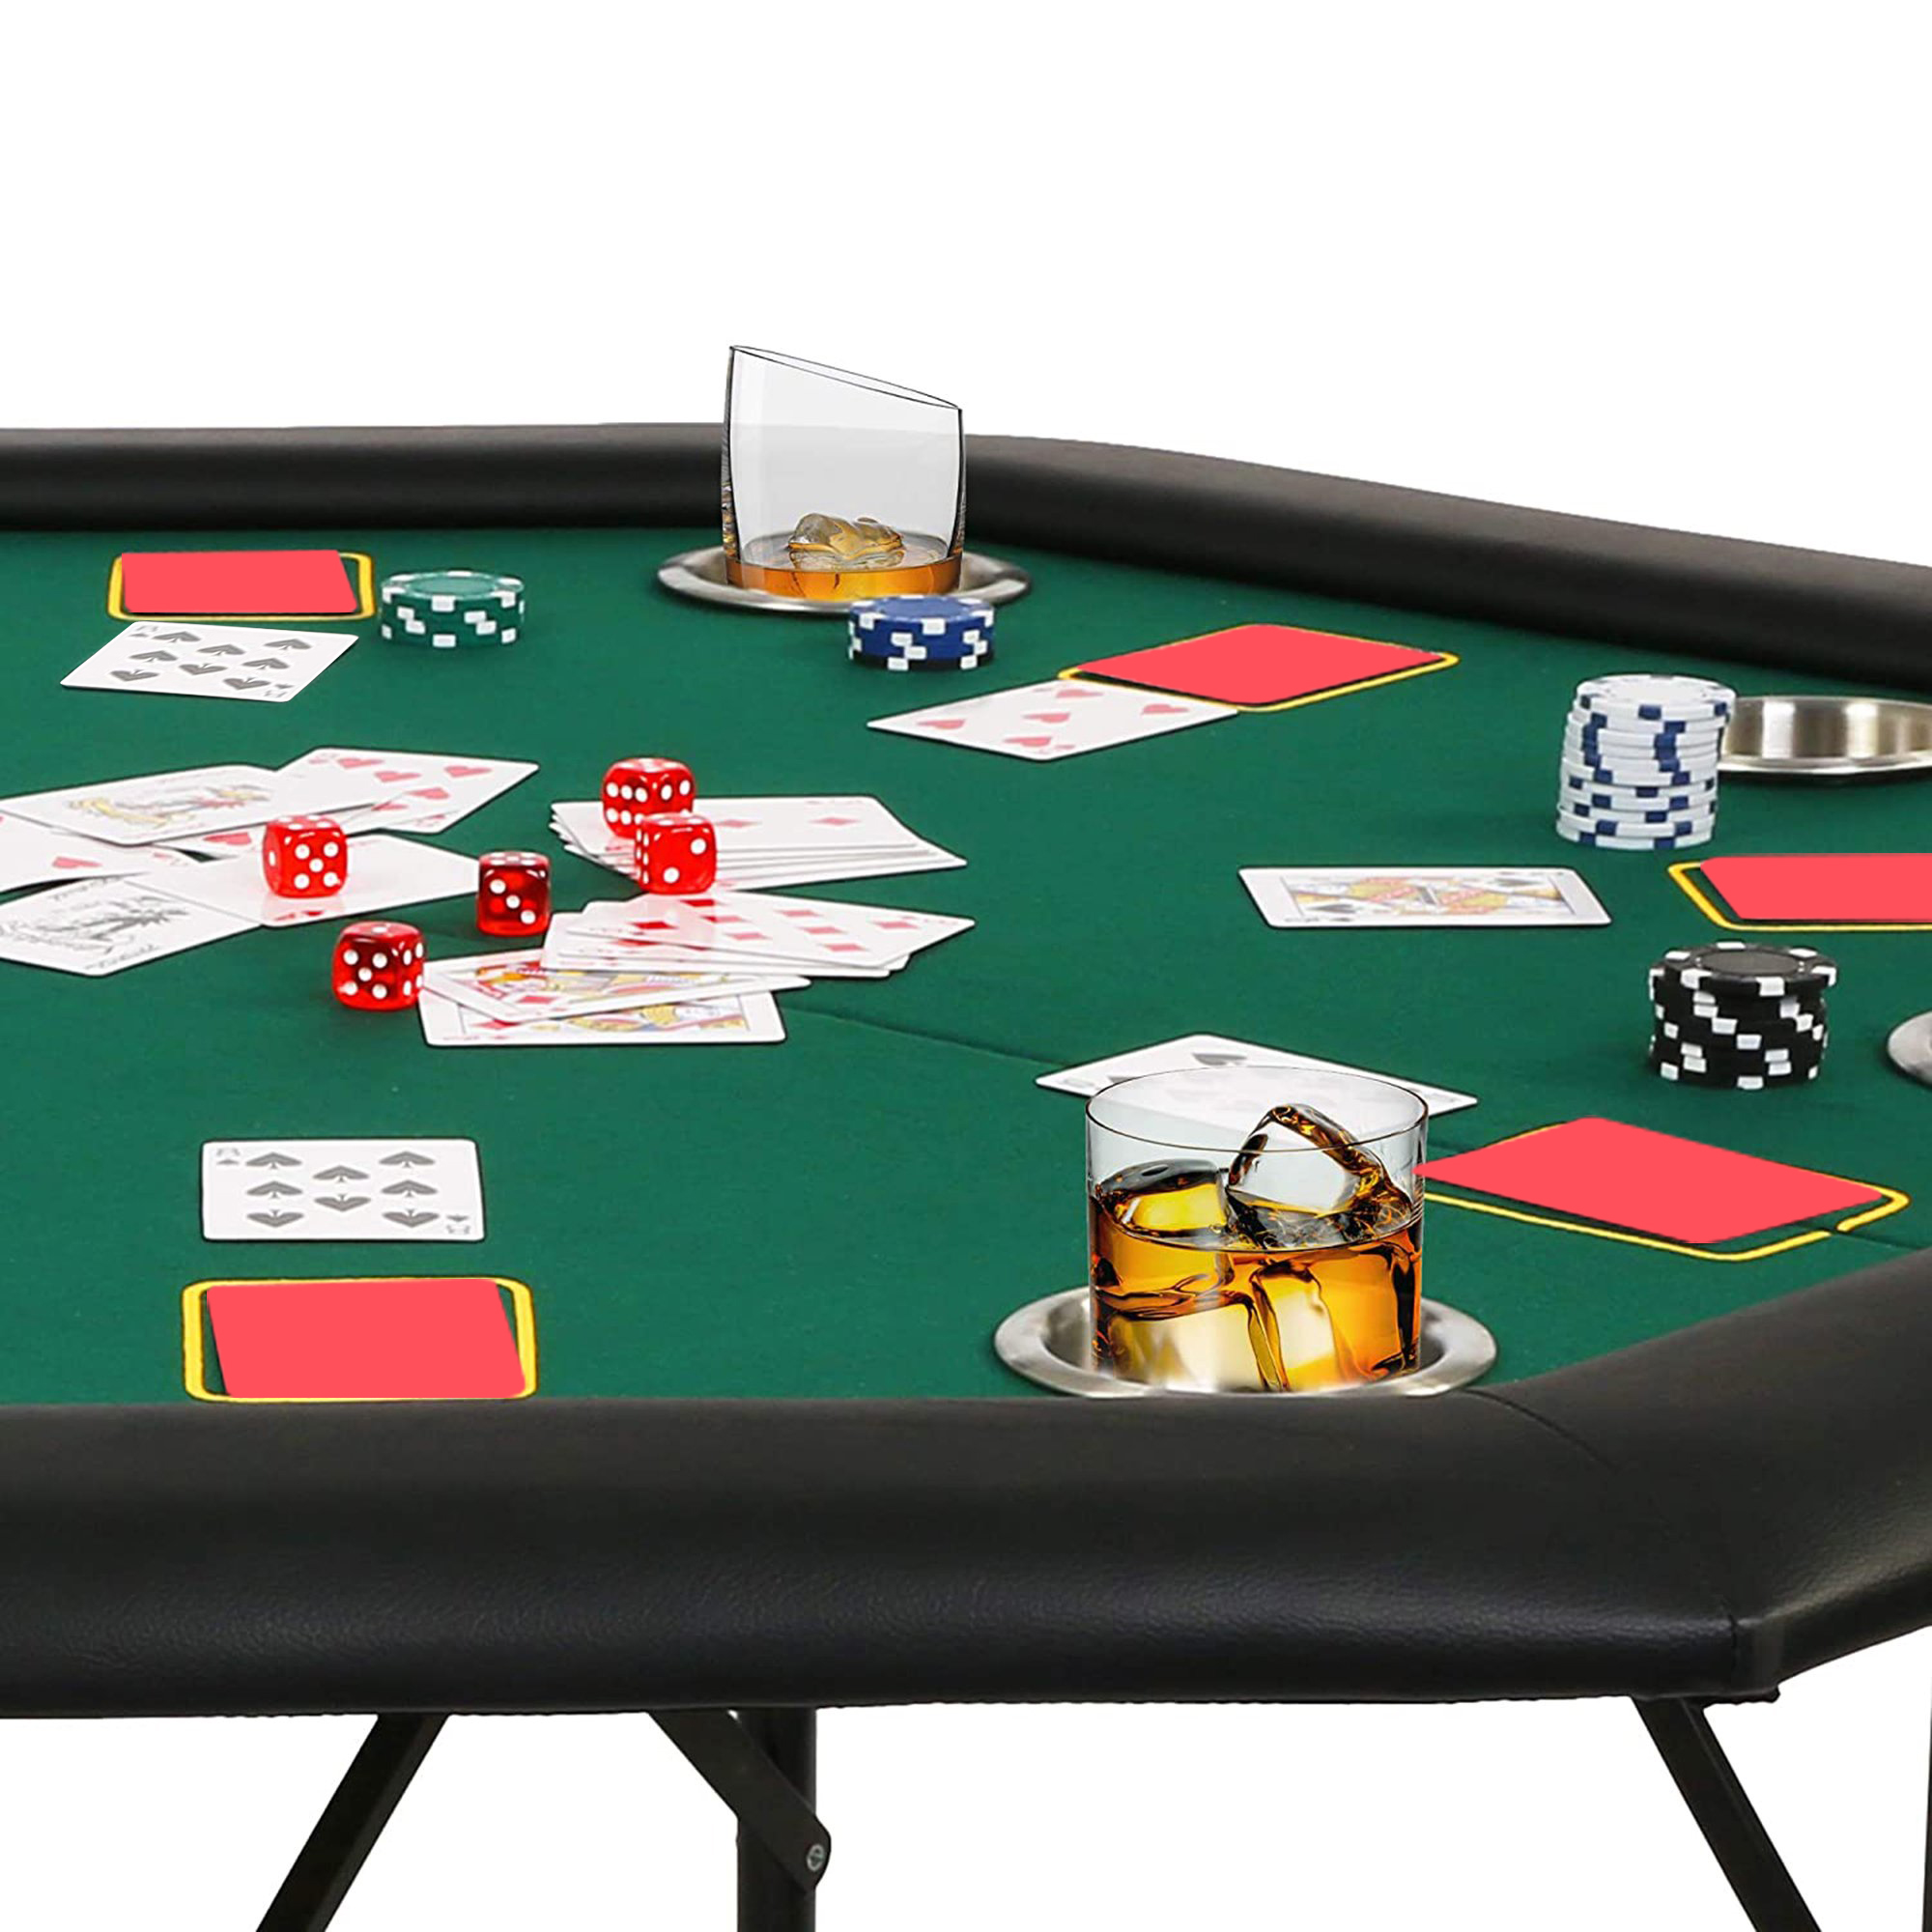 Karmas Product Folding Casino Poker Table with Cup & Foldable Leg for 8 Player, Octagon Texas Hold'em Poker Mat for Blackjack, Club, Family Games - image 5 of 8